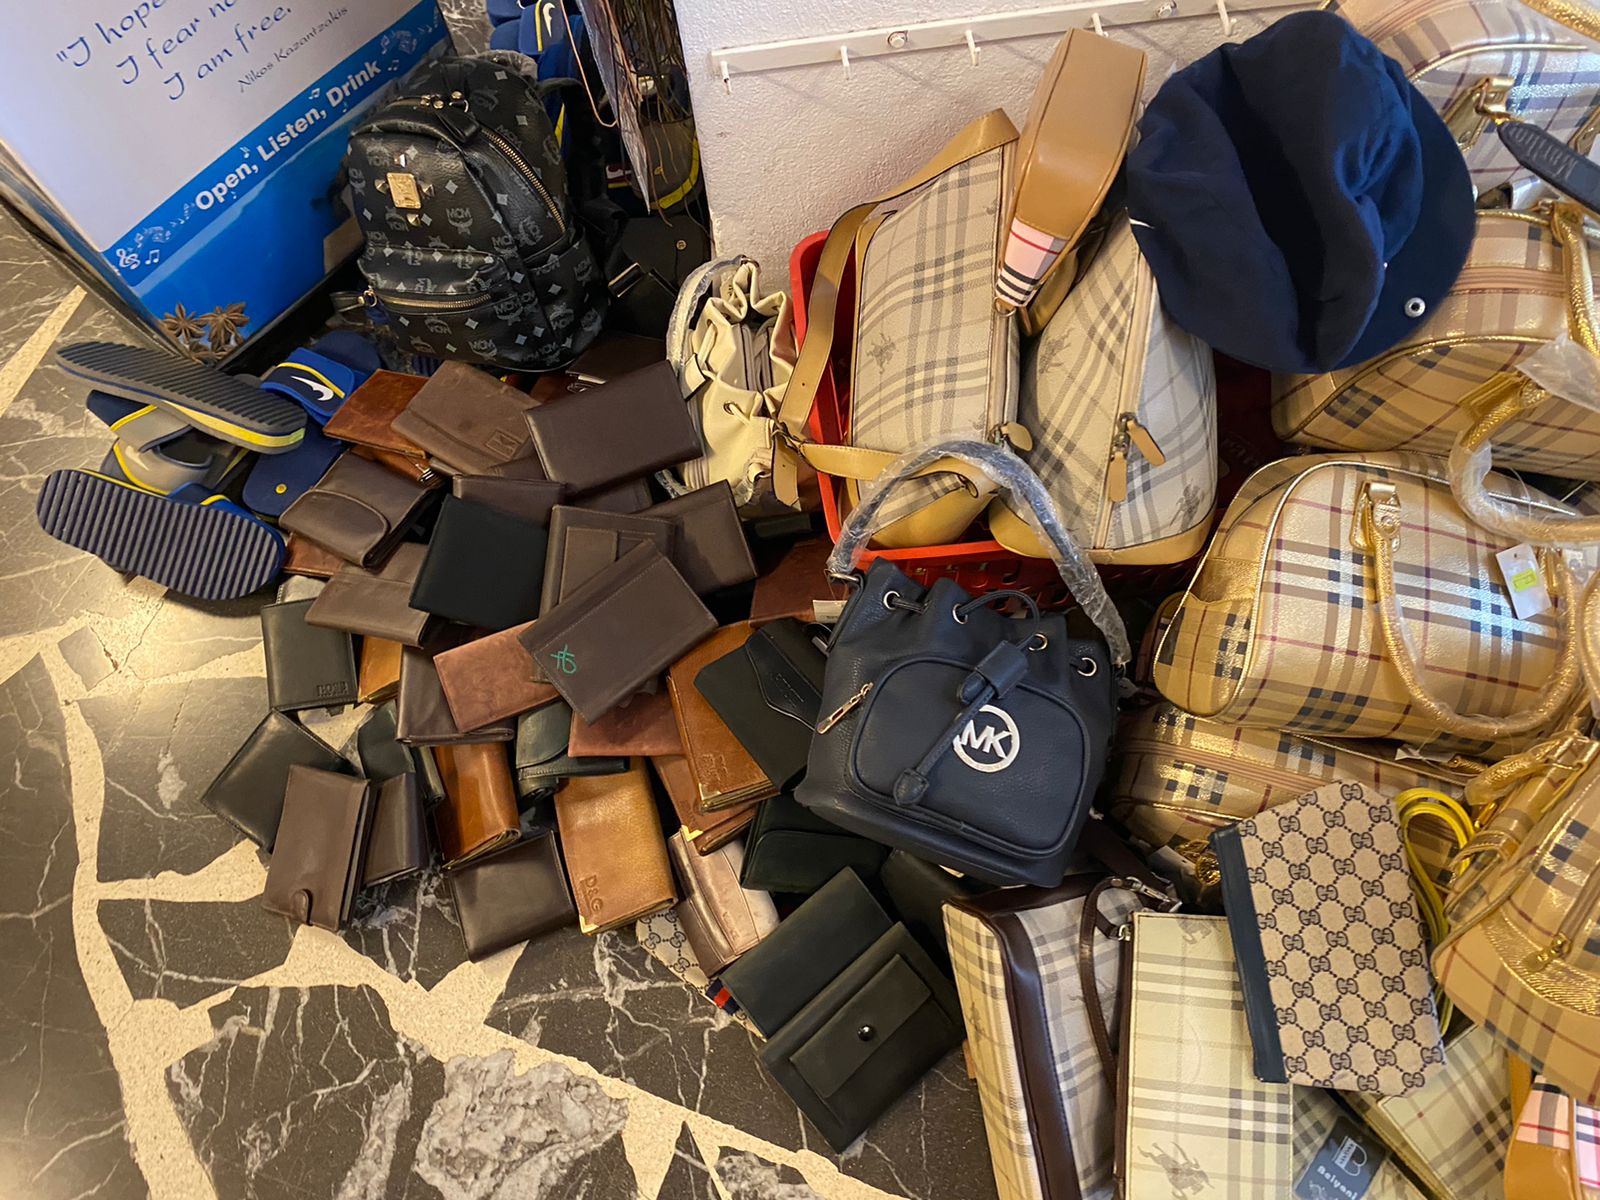 Thousands of counterfeit items seized and destroyed